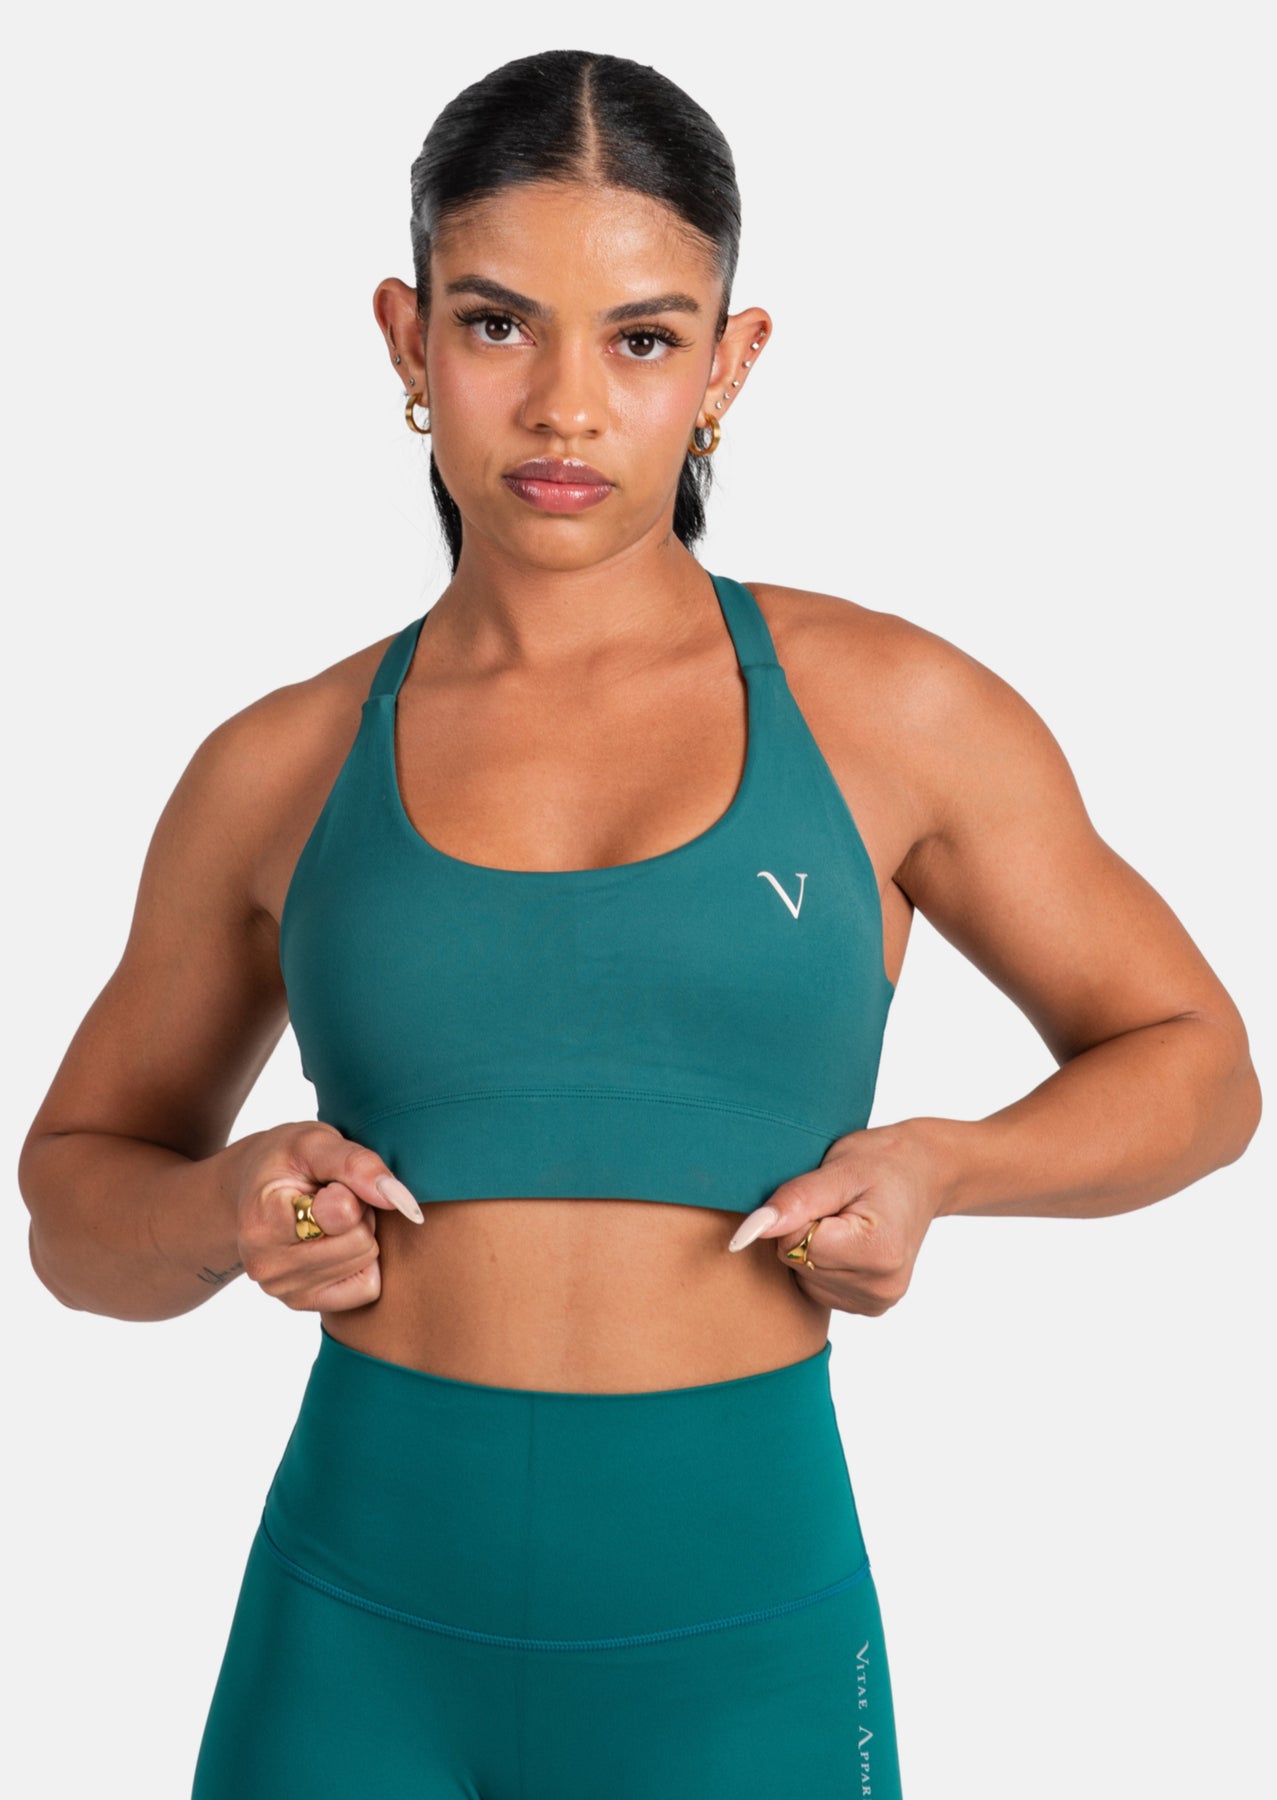 STAX Women's Green Padded Sports Bra / Top Size LARGE AS NEW